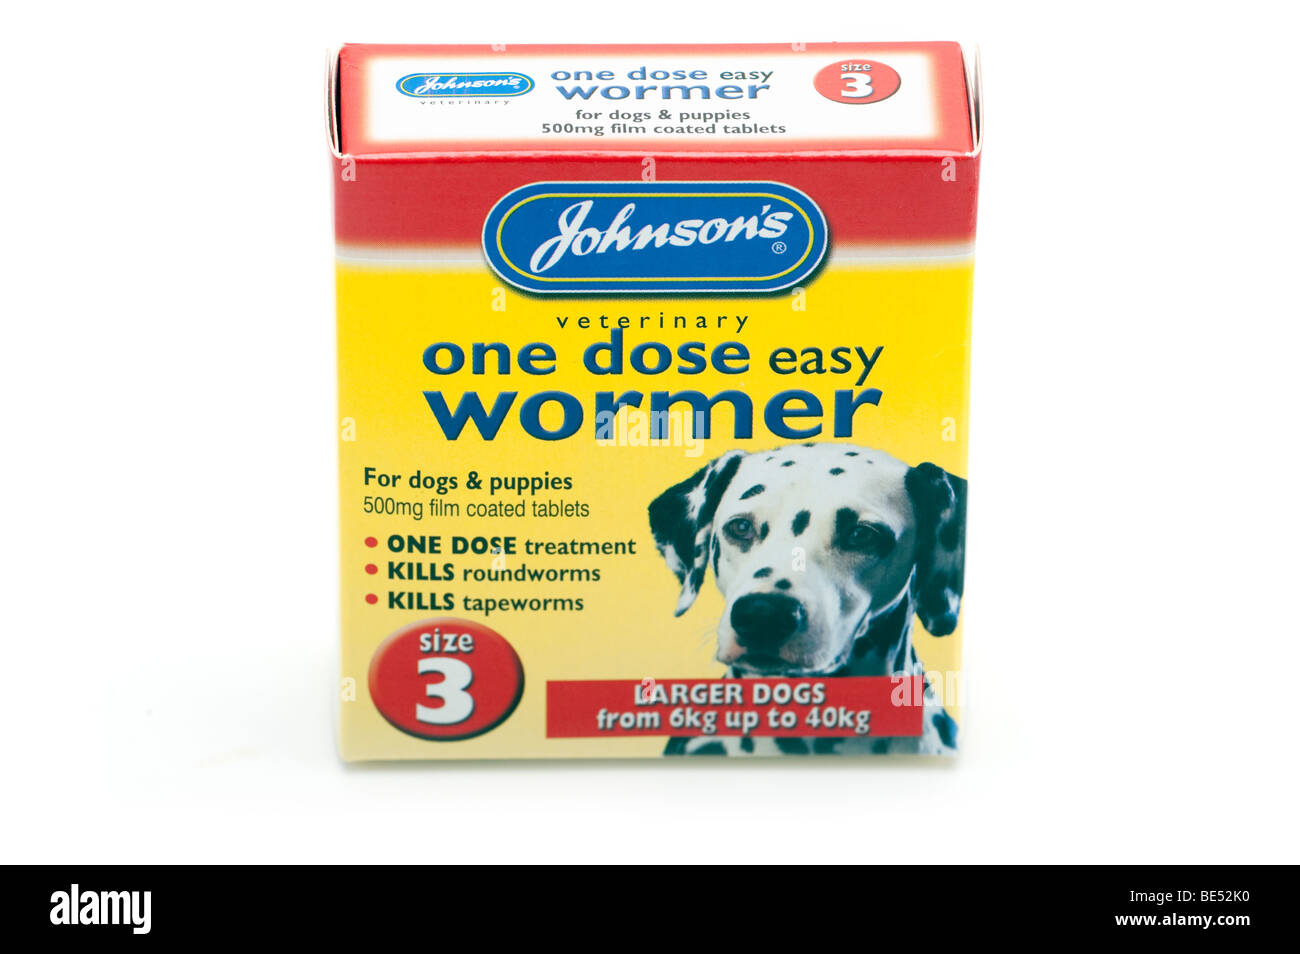 Box of Johnson's veterinary one dose easy wormer for dogs Stock Photo